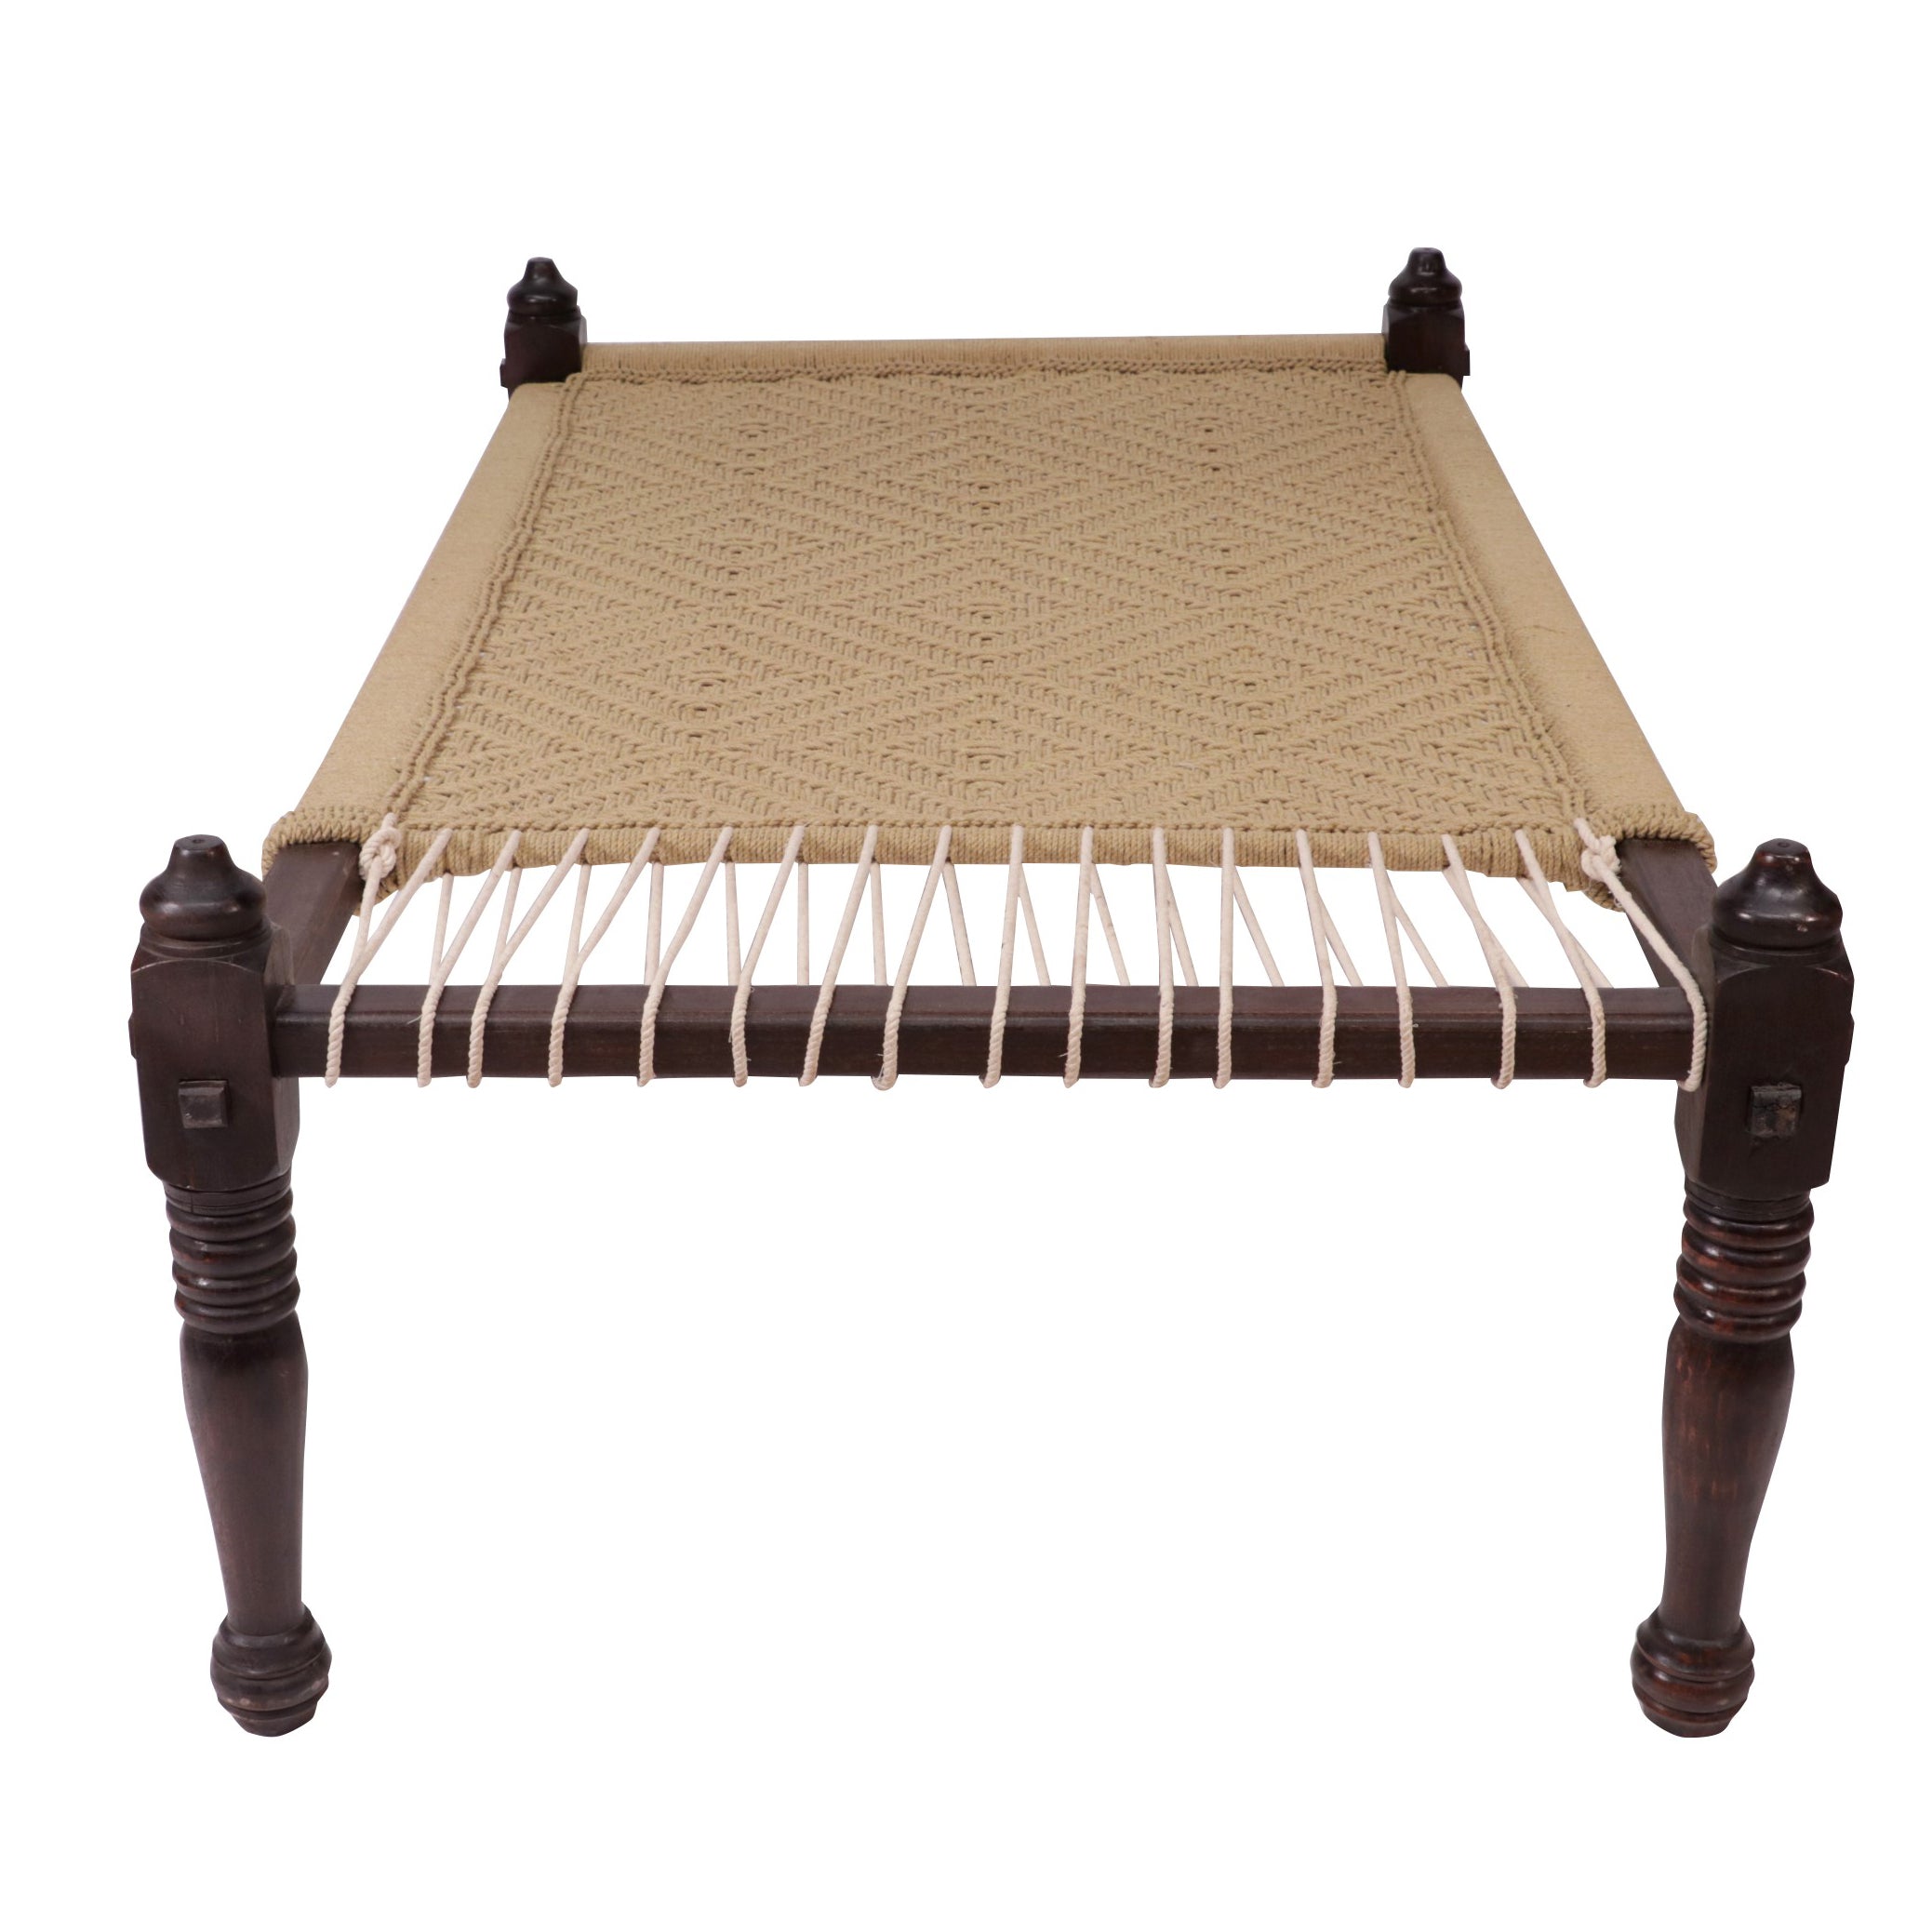 Indian classical weaved day bed Bed